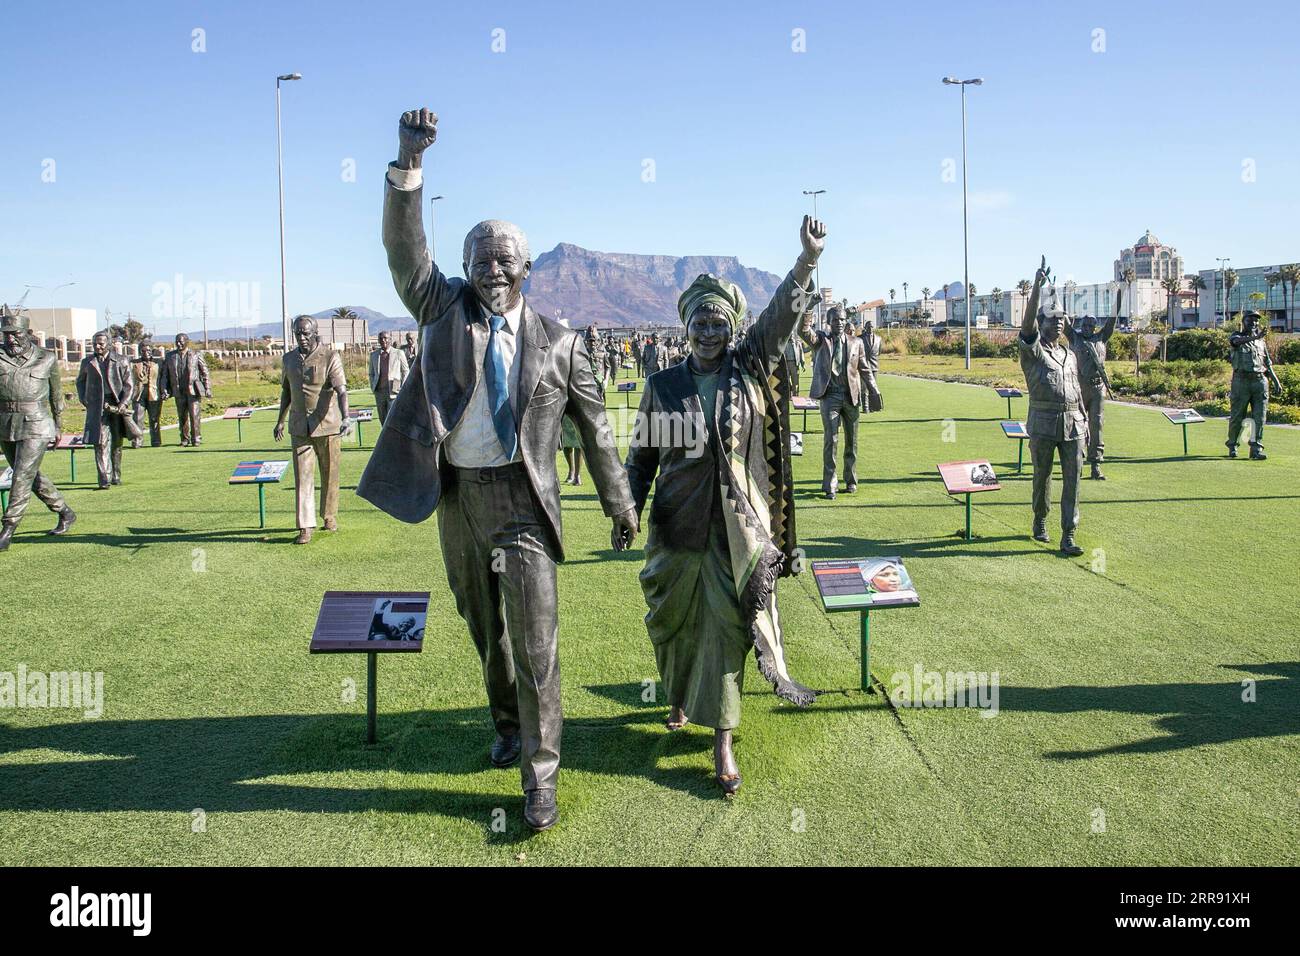 News Bilder des Tages 210524 -- CAPE TOWN, May 24, 2021 -- Bronze statues of Nelson Mandela and his wife Winnie Madikizela-Mandela are displayed at a tourist spot named The Long March to Freedom in Cape Town, South Africa, on May 23, 2021. The Long March to Freedom has life-size Bronze statues of 100 individuals who struggled for South Africa s freedom from the early 1700s to Freedom Day in April 1994.  SOUTH AFRICA-CAPE TOWN-FREEDOM-BRONZE STATUES LyvxTianran PUBLICATIONxNOTxINxCHN Stock Photo